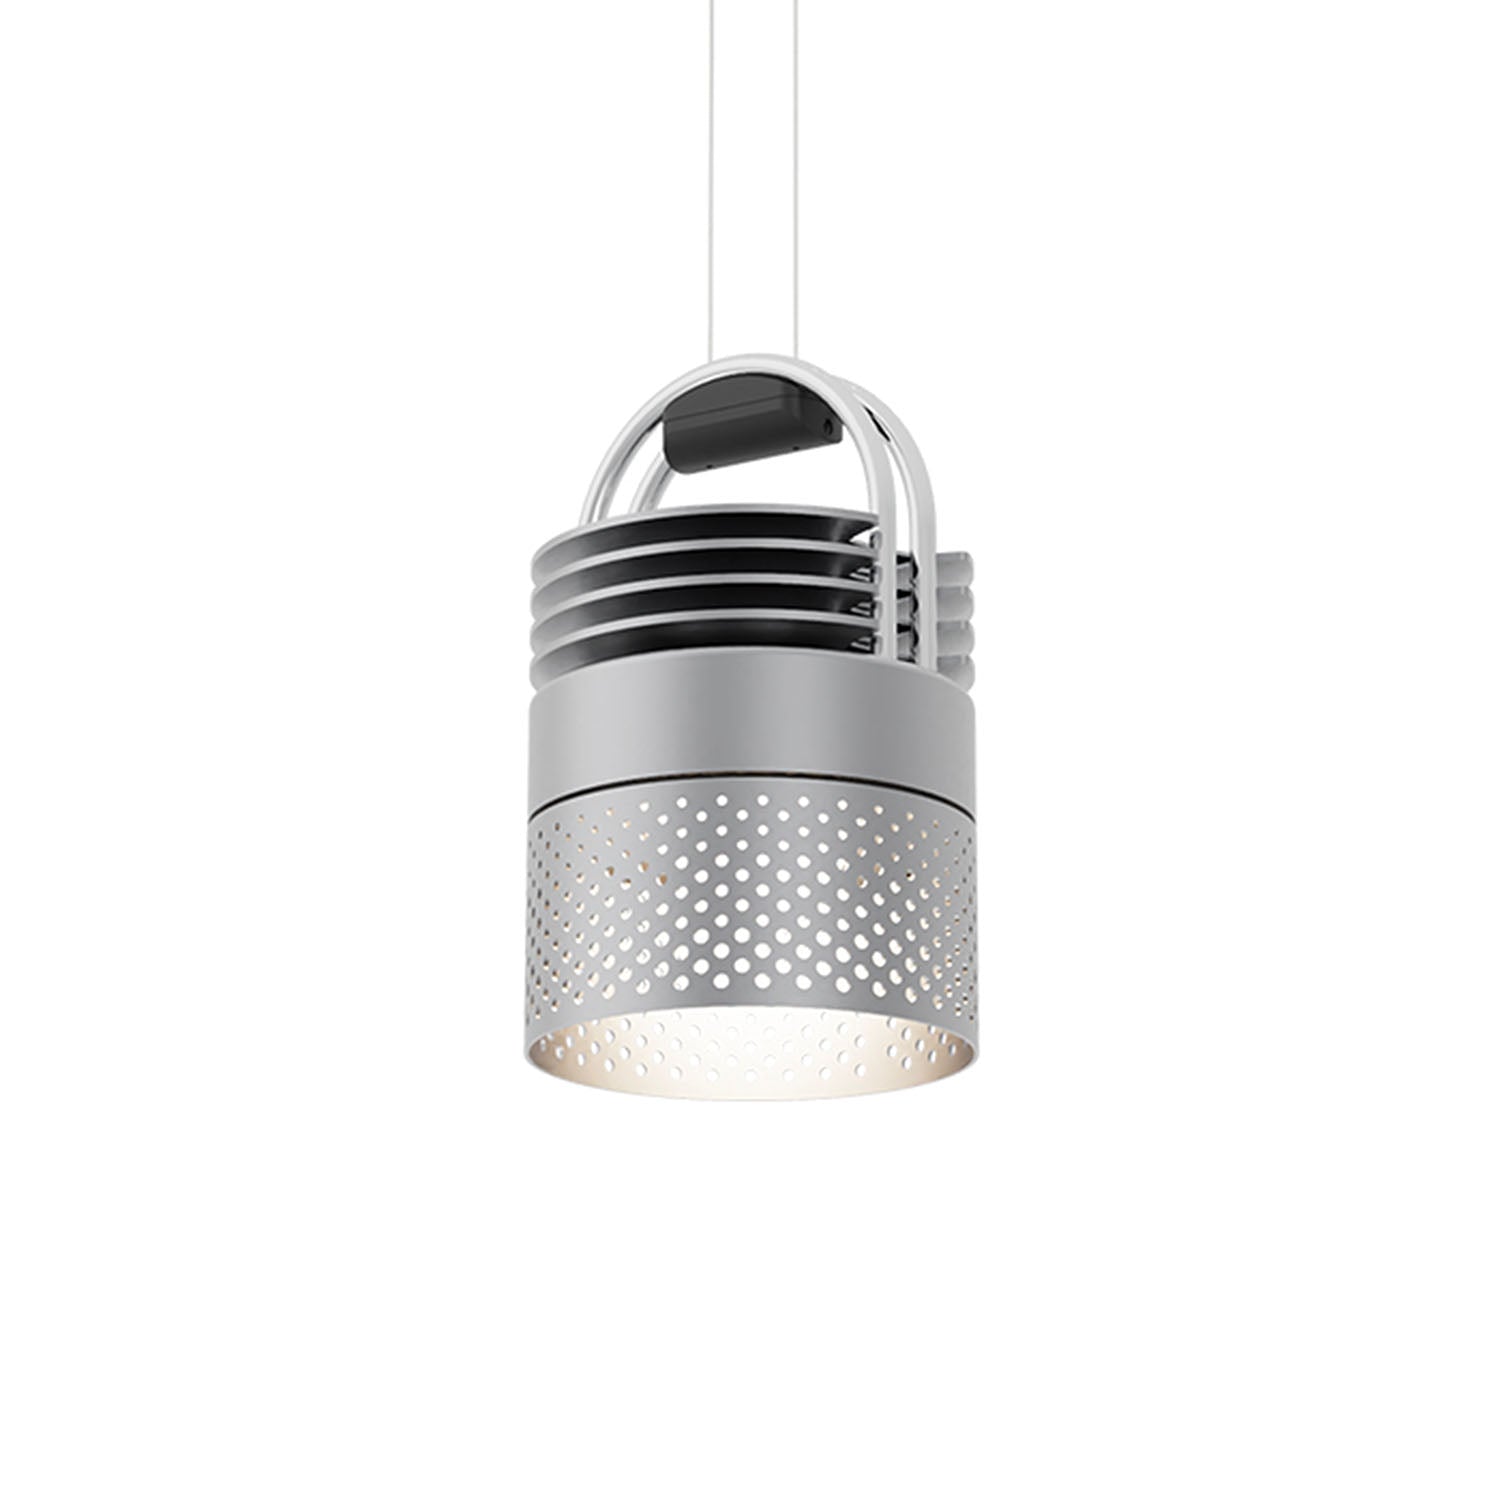 AIRMOD Perforated - Contemporary pendant light in perforated steel